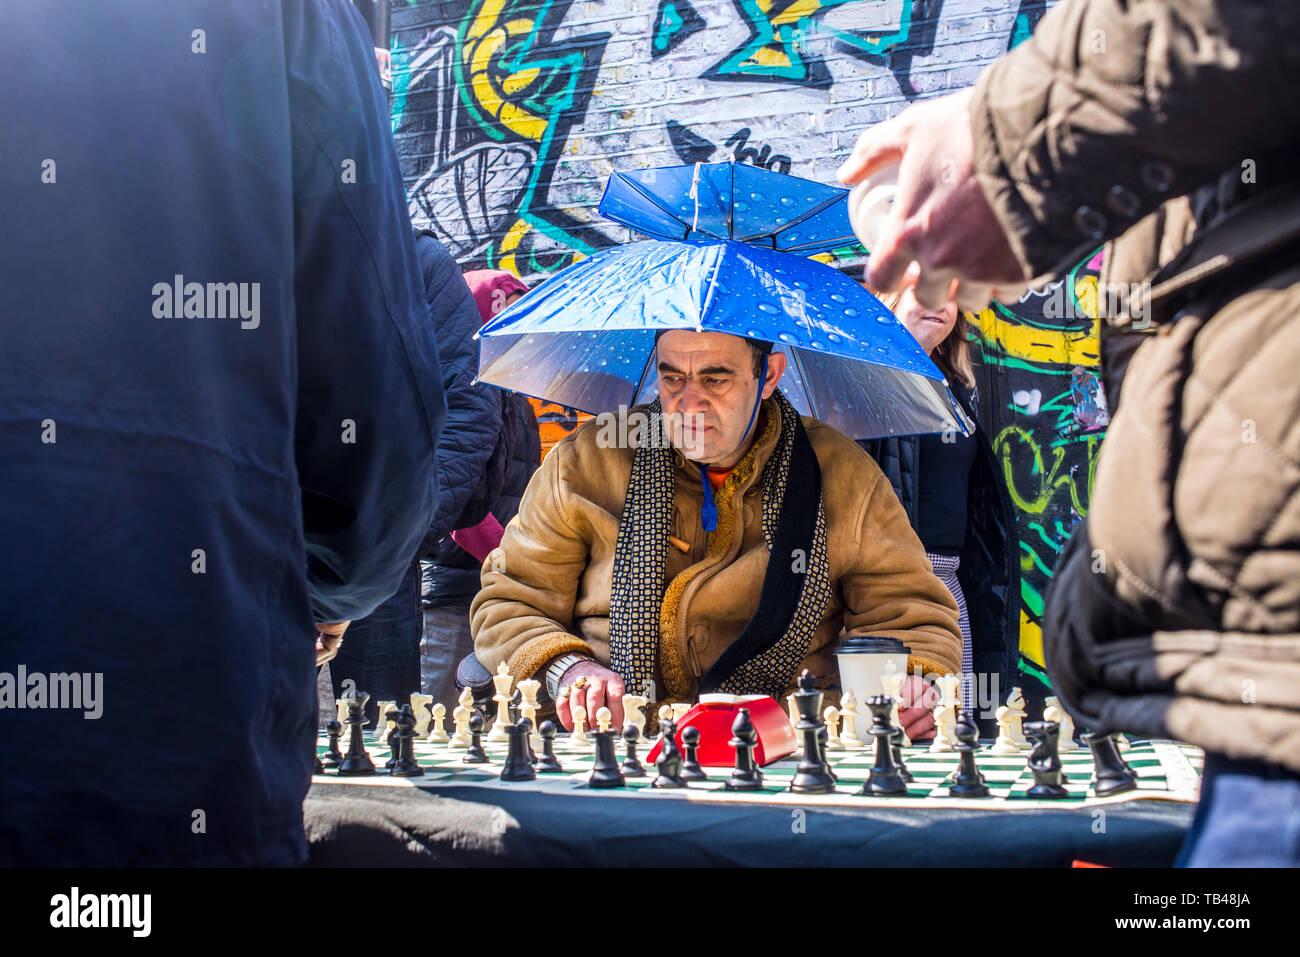 Shoreditch, London, England, UK - April 2019: Old man street chess player playing chess wearing an umbrella as hat in Brick lane, East London Stock Photo